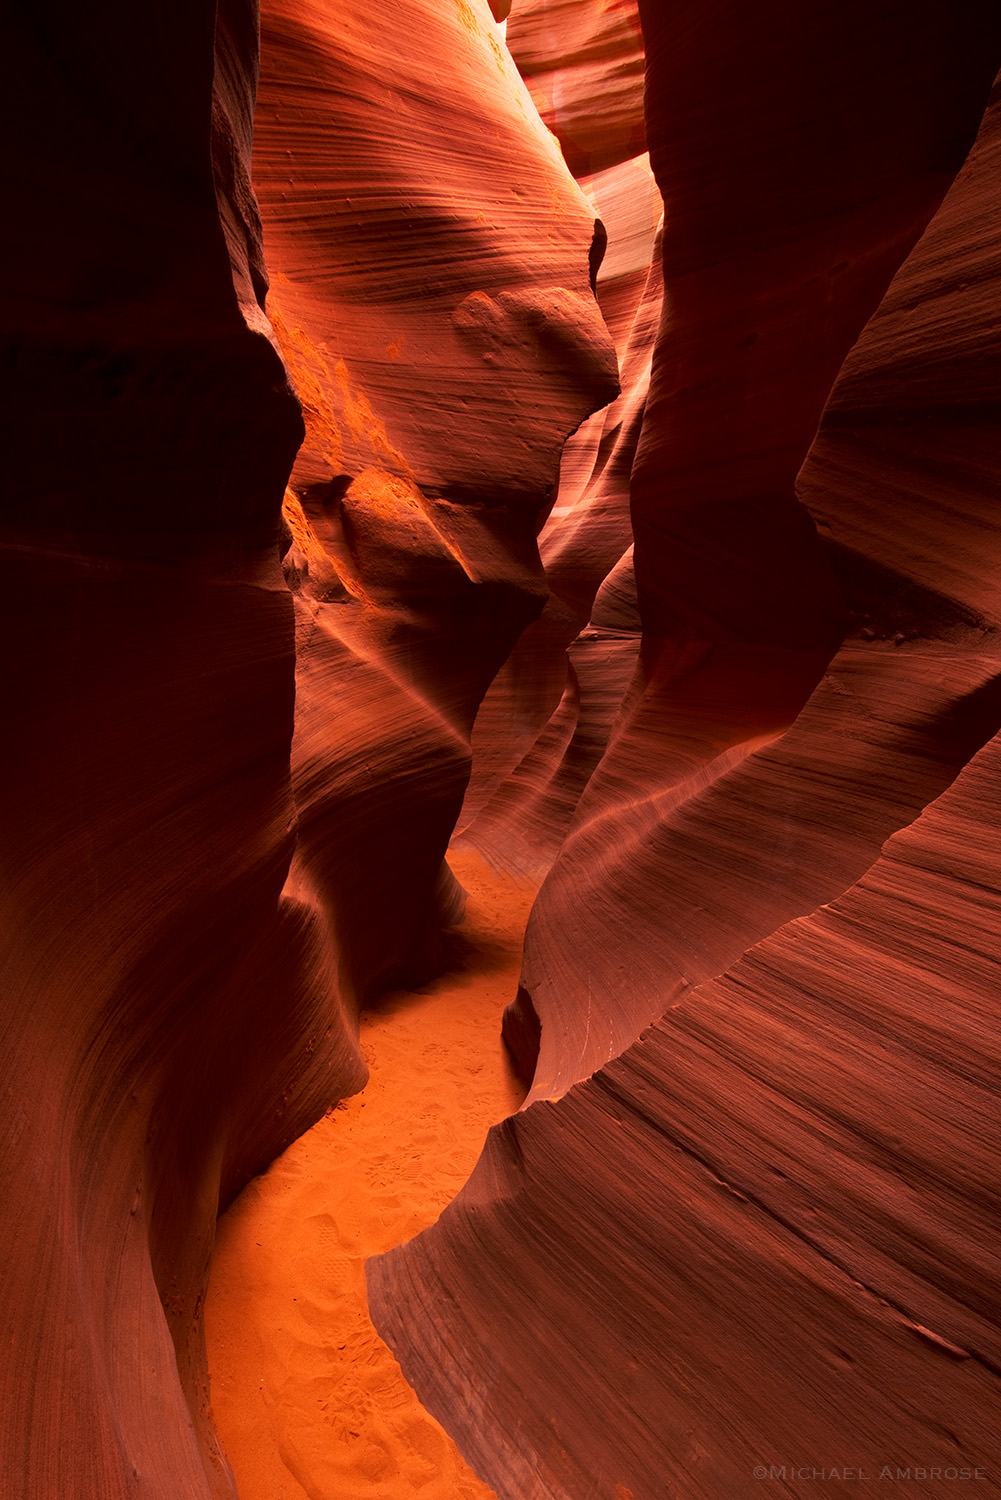 Narrow passageways wind through sandstone in this perfect example of a slot canyon in Antelope Canyon, Arizona.